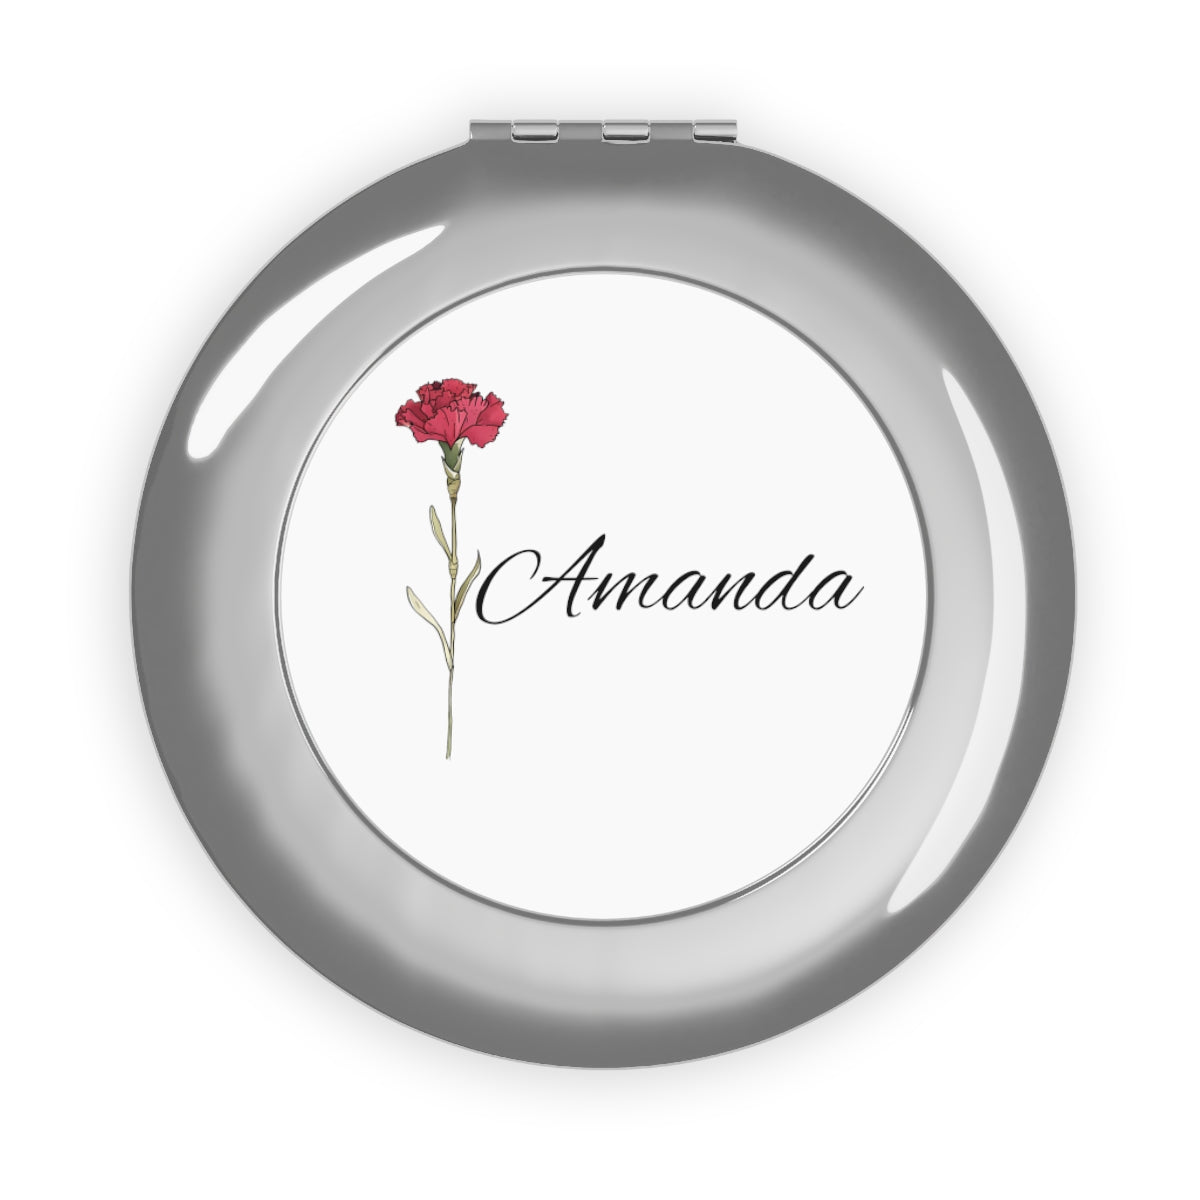 Get trendy with Personalized Bridesmaid birth flower/name Compact Travel Mirror -  available at Good Gift Company. Grab yours for $19.25 today!